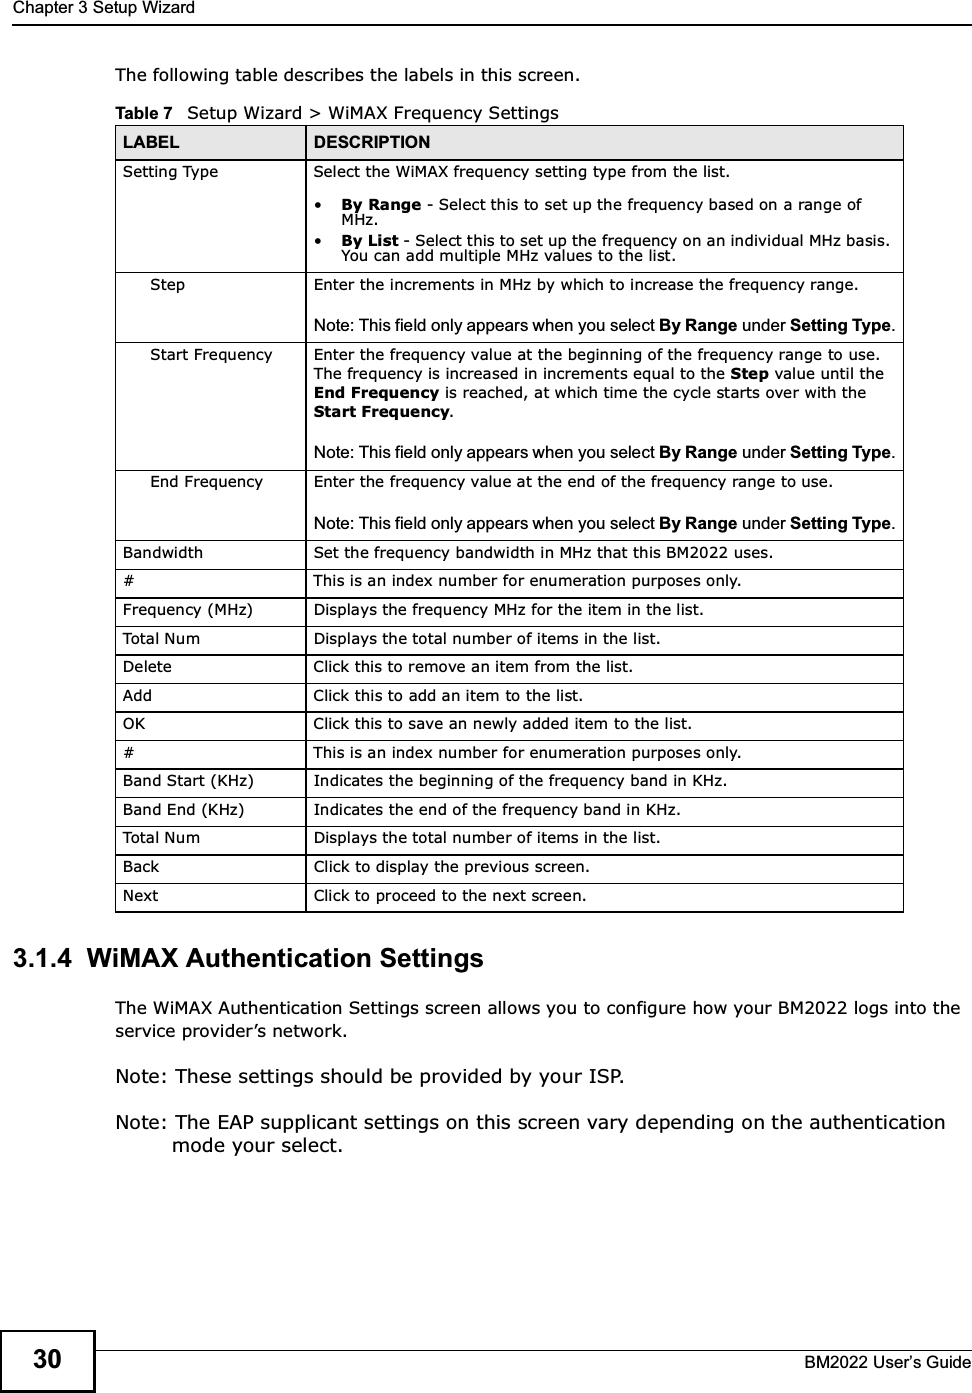 Chapter 3 Setup WizardBM2022 Users Guide30The following table describes the labels in this screen.3.1.4  WiMAX Authentication SettingsThe WiMAX Authentication Settings screen allows you to configure how your BM2022 logs into the service providers network.Note: These settings should be provided by your ISP.Note: The EAP supplicant settings on this screen vary depending on the authentication mode your select.Table 7   Setup Wizard &gt; WiMAX Frequency SettingsLABEL DESCRIPTIONSetting Type Select the WiMAX frequency setting type from the list.By Range - Select this to set up the frequency based on a range of MHz.By List - Select this to set up the frequency on an individual MHz basis. You can add multiple MHz values to the list.Step Enter the increments in MHz by which to increase the frequency range.Note: This field only appears when you select By Range under Setting Type.Start Frequency Enter the frequency value at the beginning of the frequency range to use. The frequency is increased in increments equal to the Step value until the End Frequency is reached, at which time the cycle starts over with the Start Frequency.Note: This field only appears when you select By Range under Setting Type.End Frequency Enter the frequency value at the end of the frequency range to use. Note: This field only appears when you select By Range under Setting Type.Bandwidth Set the frequency bandwidth in MHz that this BM2022 uses.# This is an index number for enumeration purposes only.Frequency (MHz) Displays the frequency MHz for the item in the list.Total Num Displays the total number of items in the list.Delete Click this to remove an item from the list.Add Click this to add an item to the list.OK Click this to save an newly added item to the list.# This is an index number for enumeration purposes only.Band Start (KHz) Indicates the beginning of the frequency band in KHz.Band End (KHz) Indicates the end of the frequency band in KHz.Total Num Displays the total number of items in the list.Back Click to display the previous screen.Next Click to proceed to the next screen.